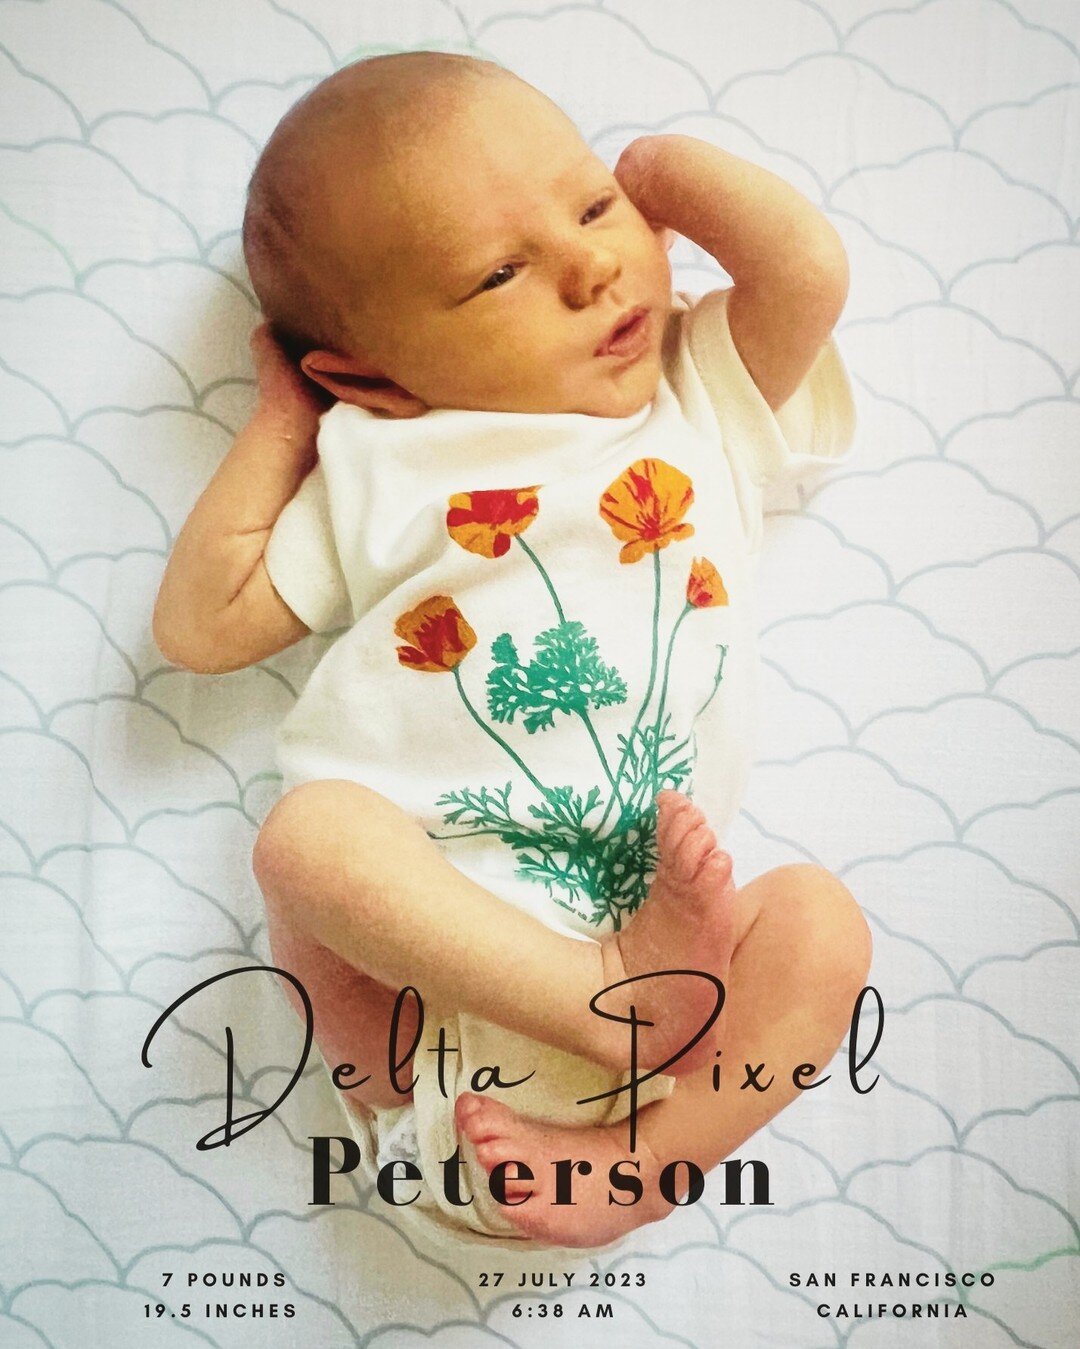 My latest adventure: this incredible little girl. 

Meet Delta Pixel Peterson, born July 27 at California Pacific Medical Center in San Francisco. Though it&rsquo;s been a rough start, with a complicated birth and a brief stay in the NICU, we are hap